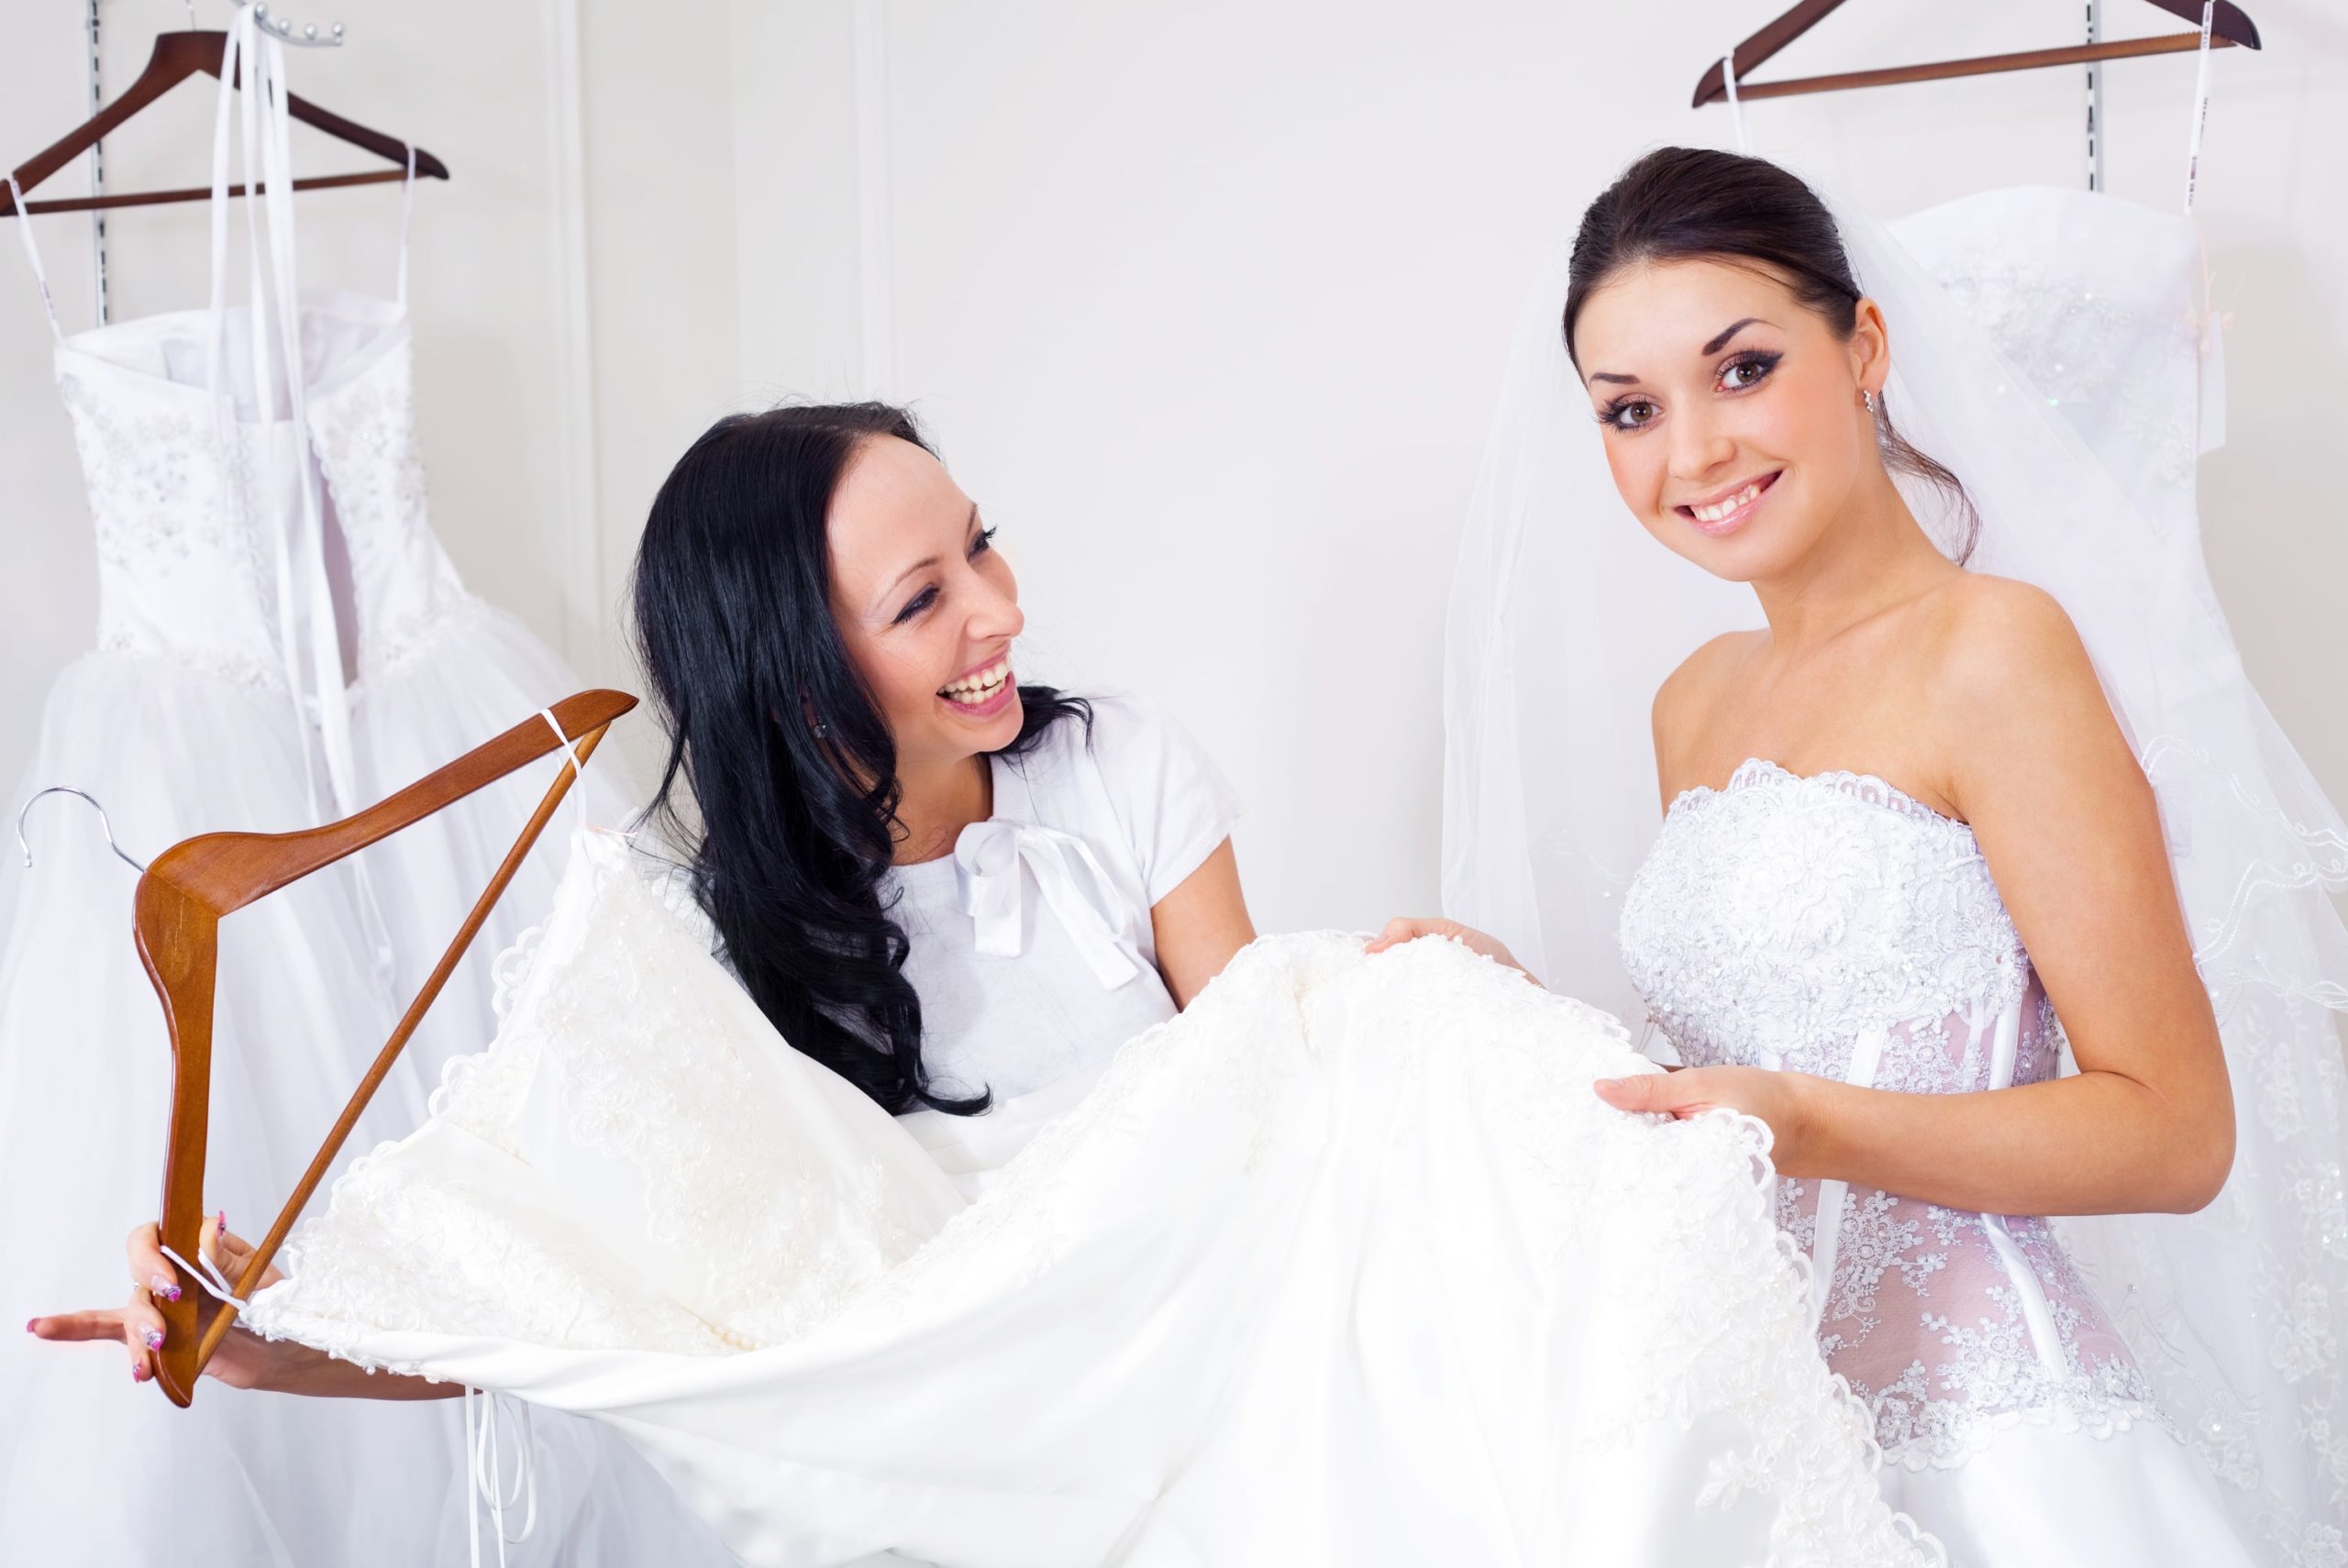 Wedding Dresses – Pros and Cons